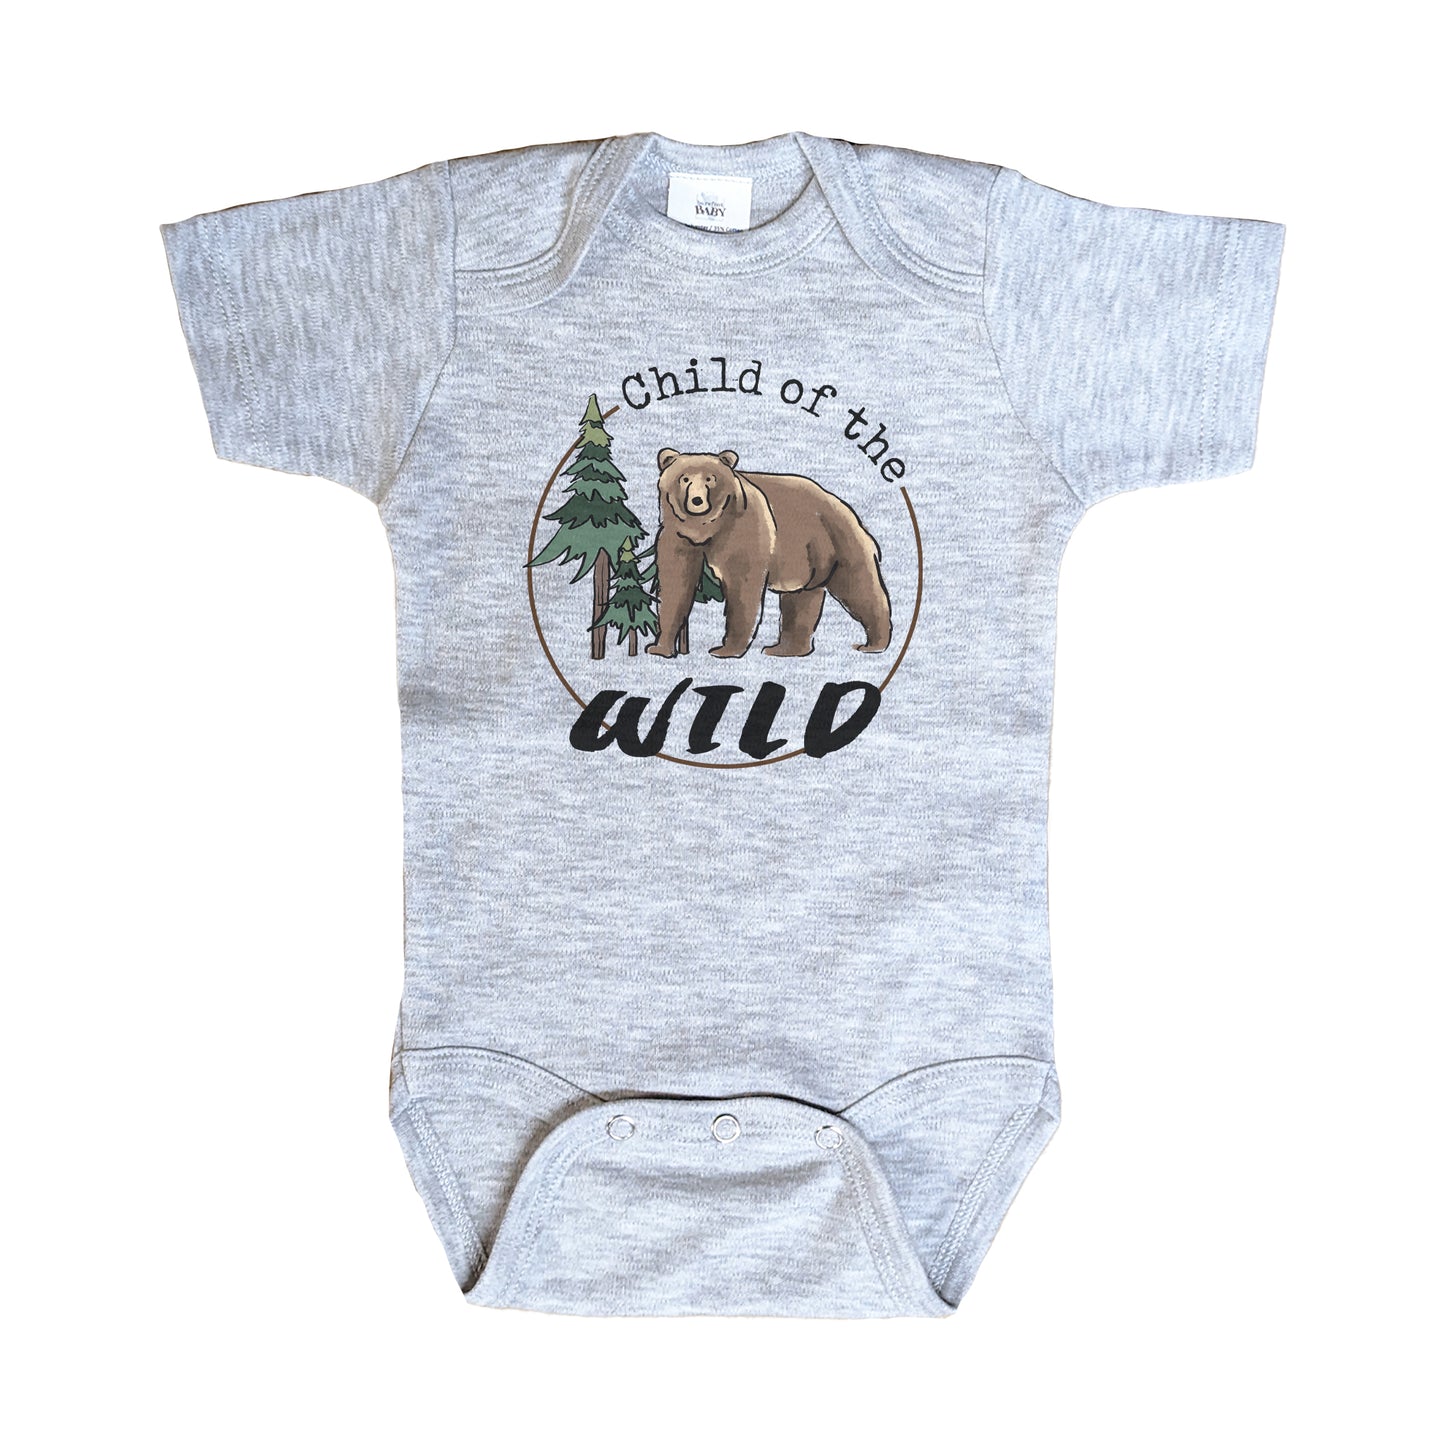 "Child of the wild" Bear Grey Baby Body Suit